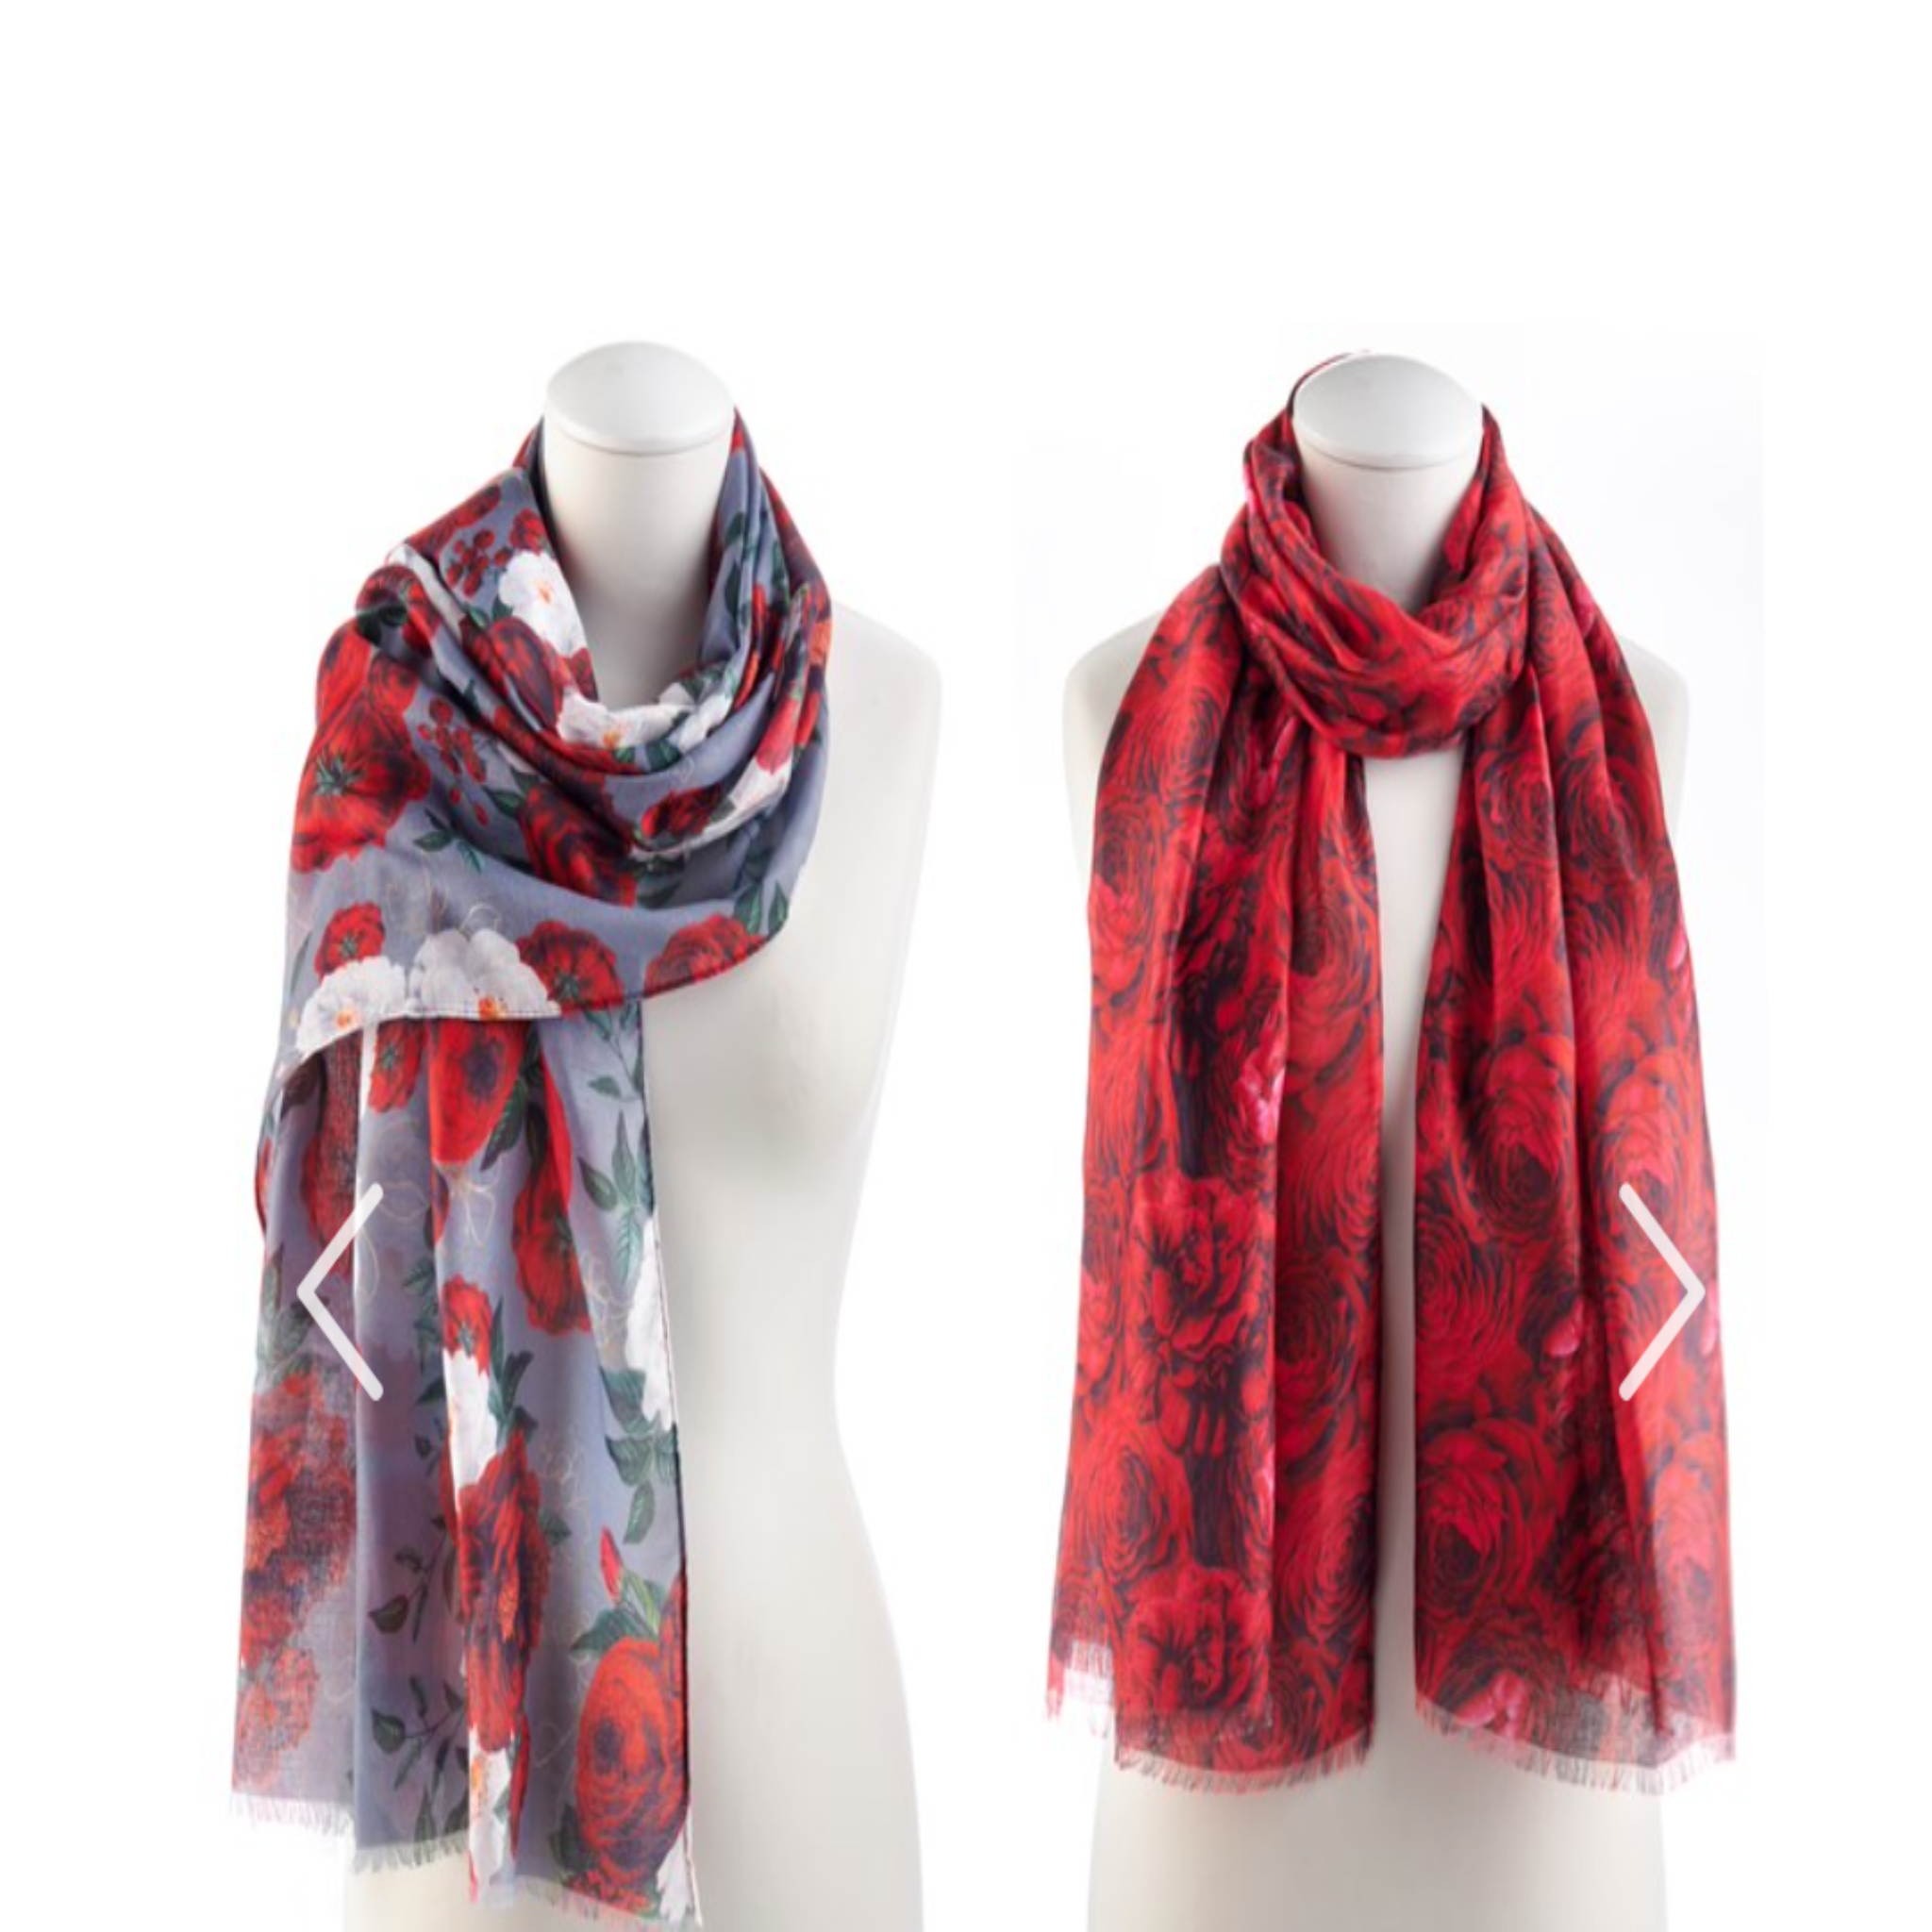 Floral Printed Scarf Fall